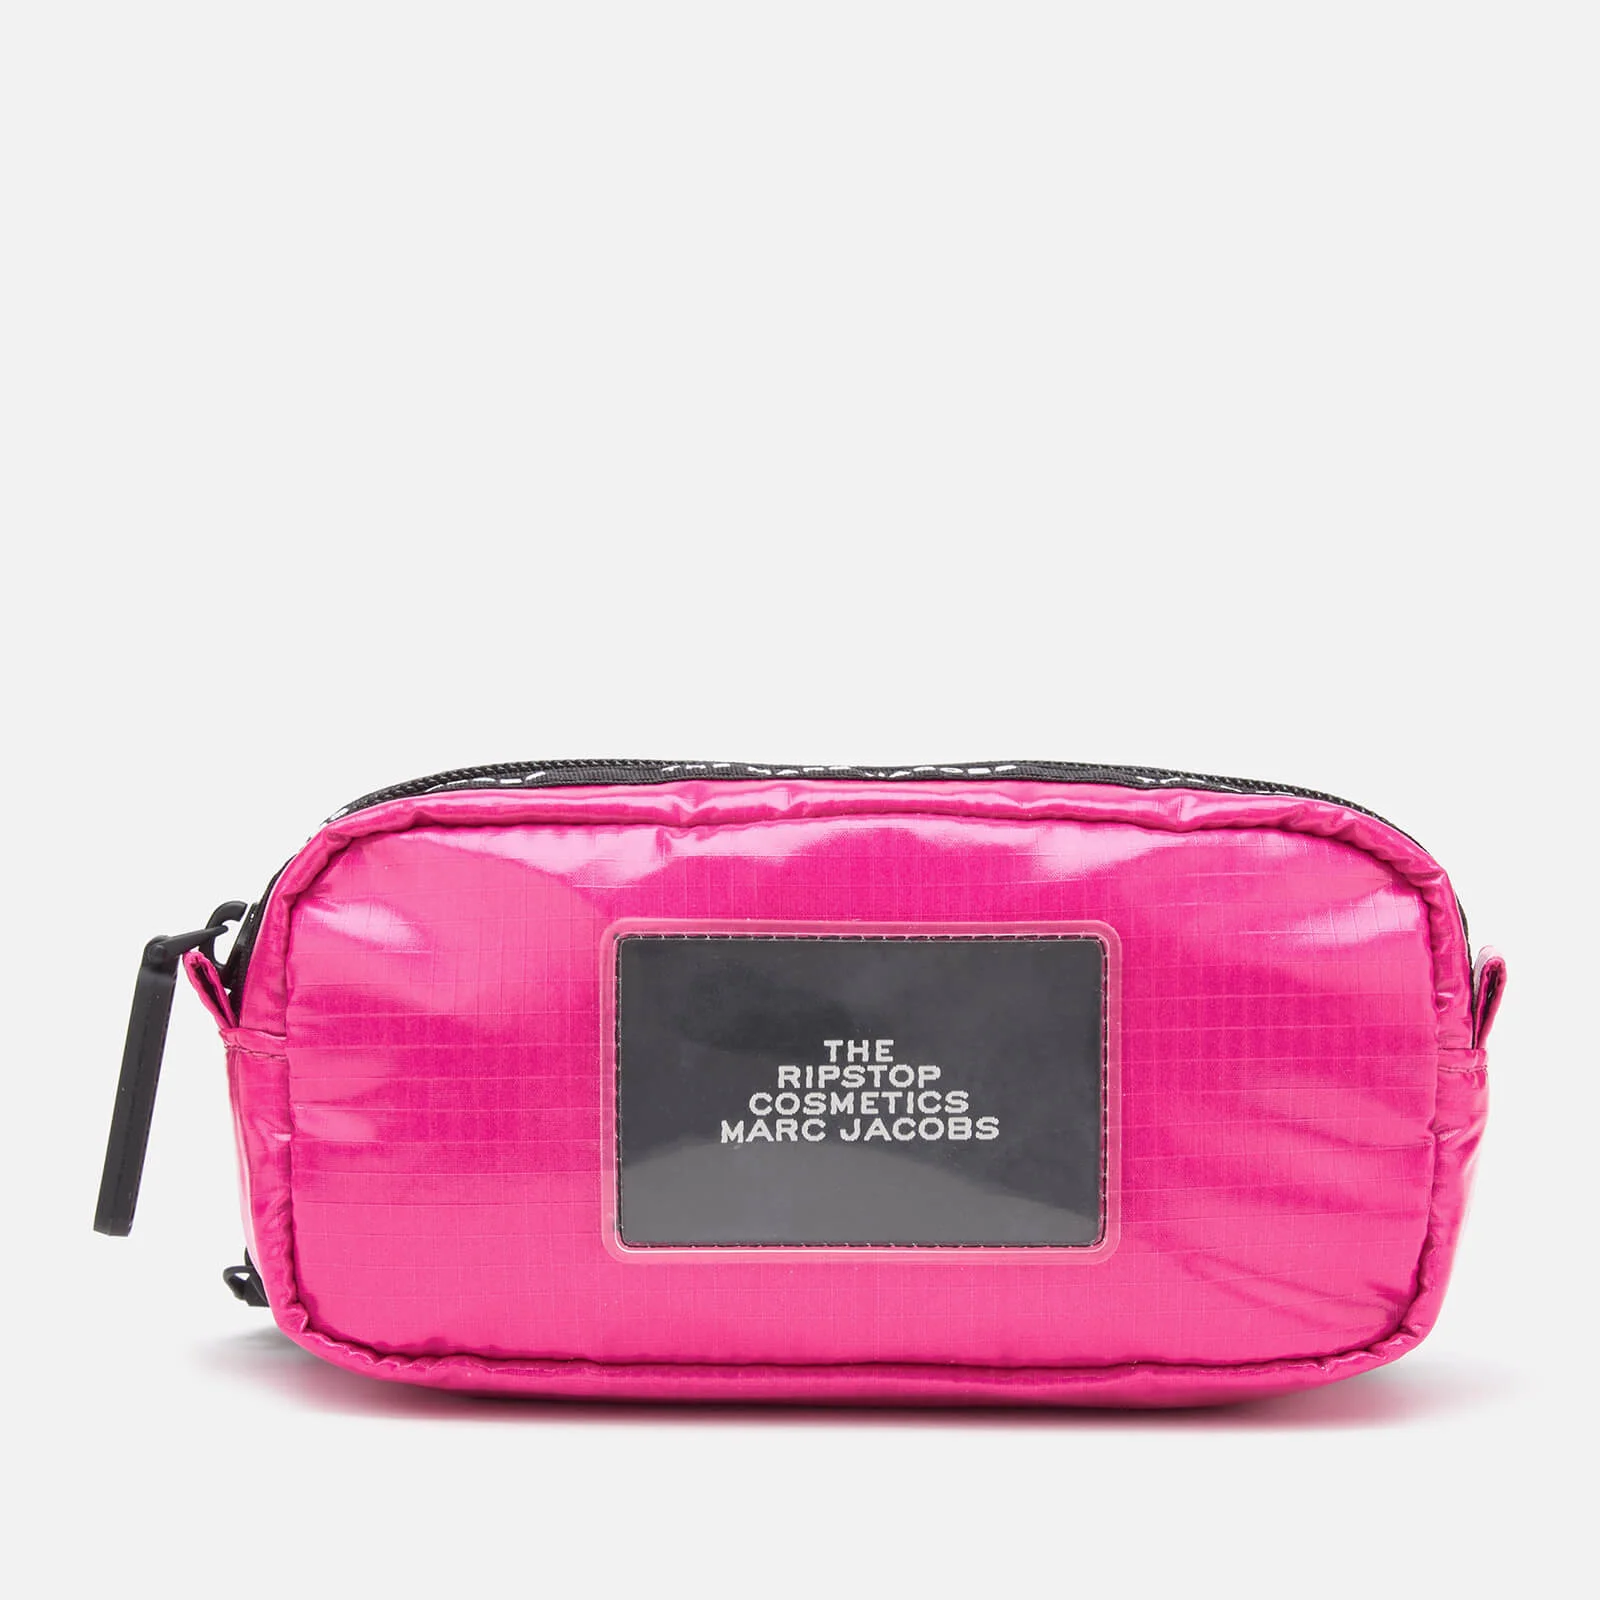 Marc Jacobs Women's Double Zip Pouch - Bright Pink Image 1